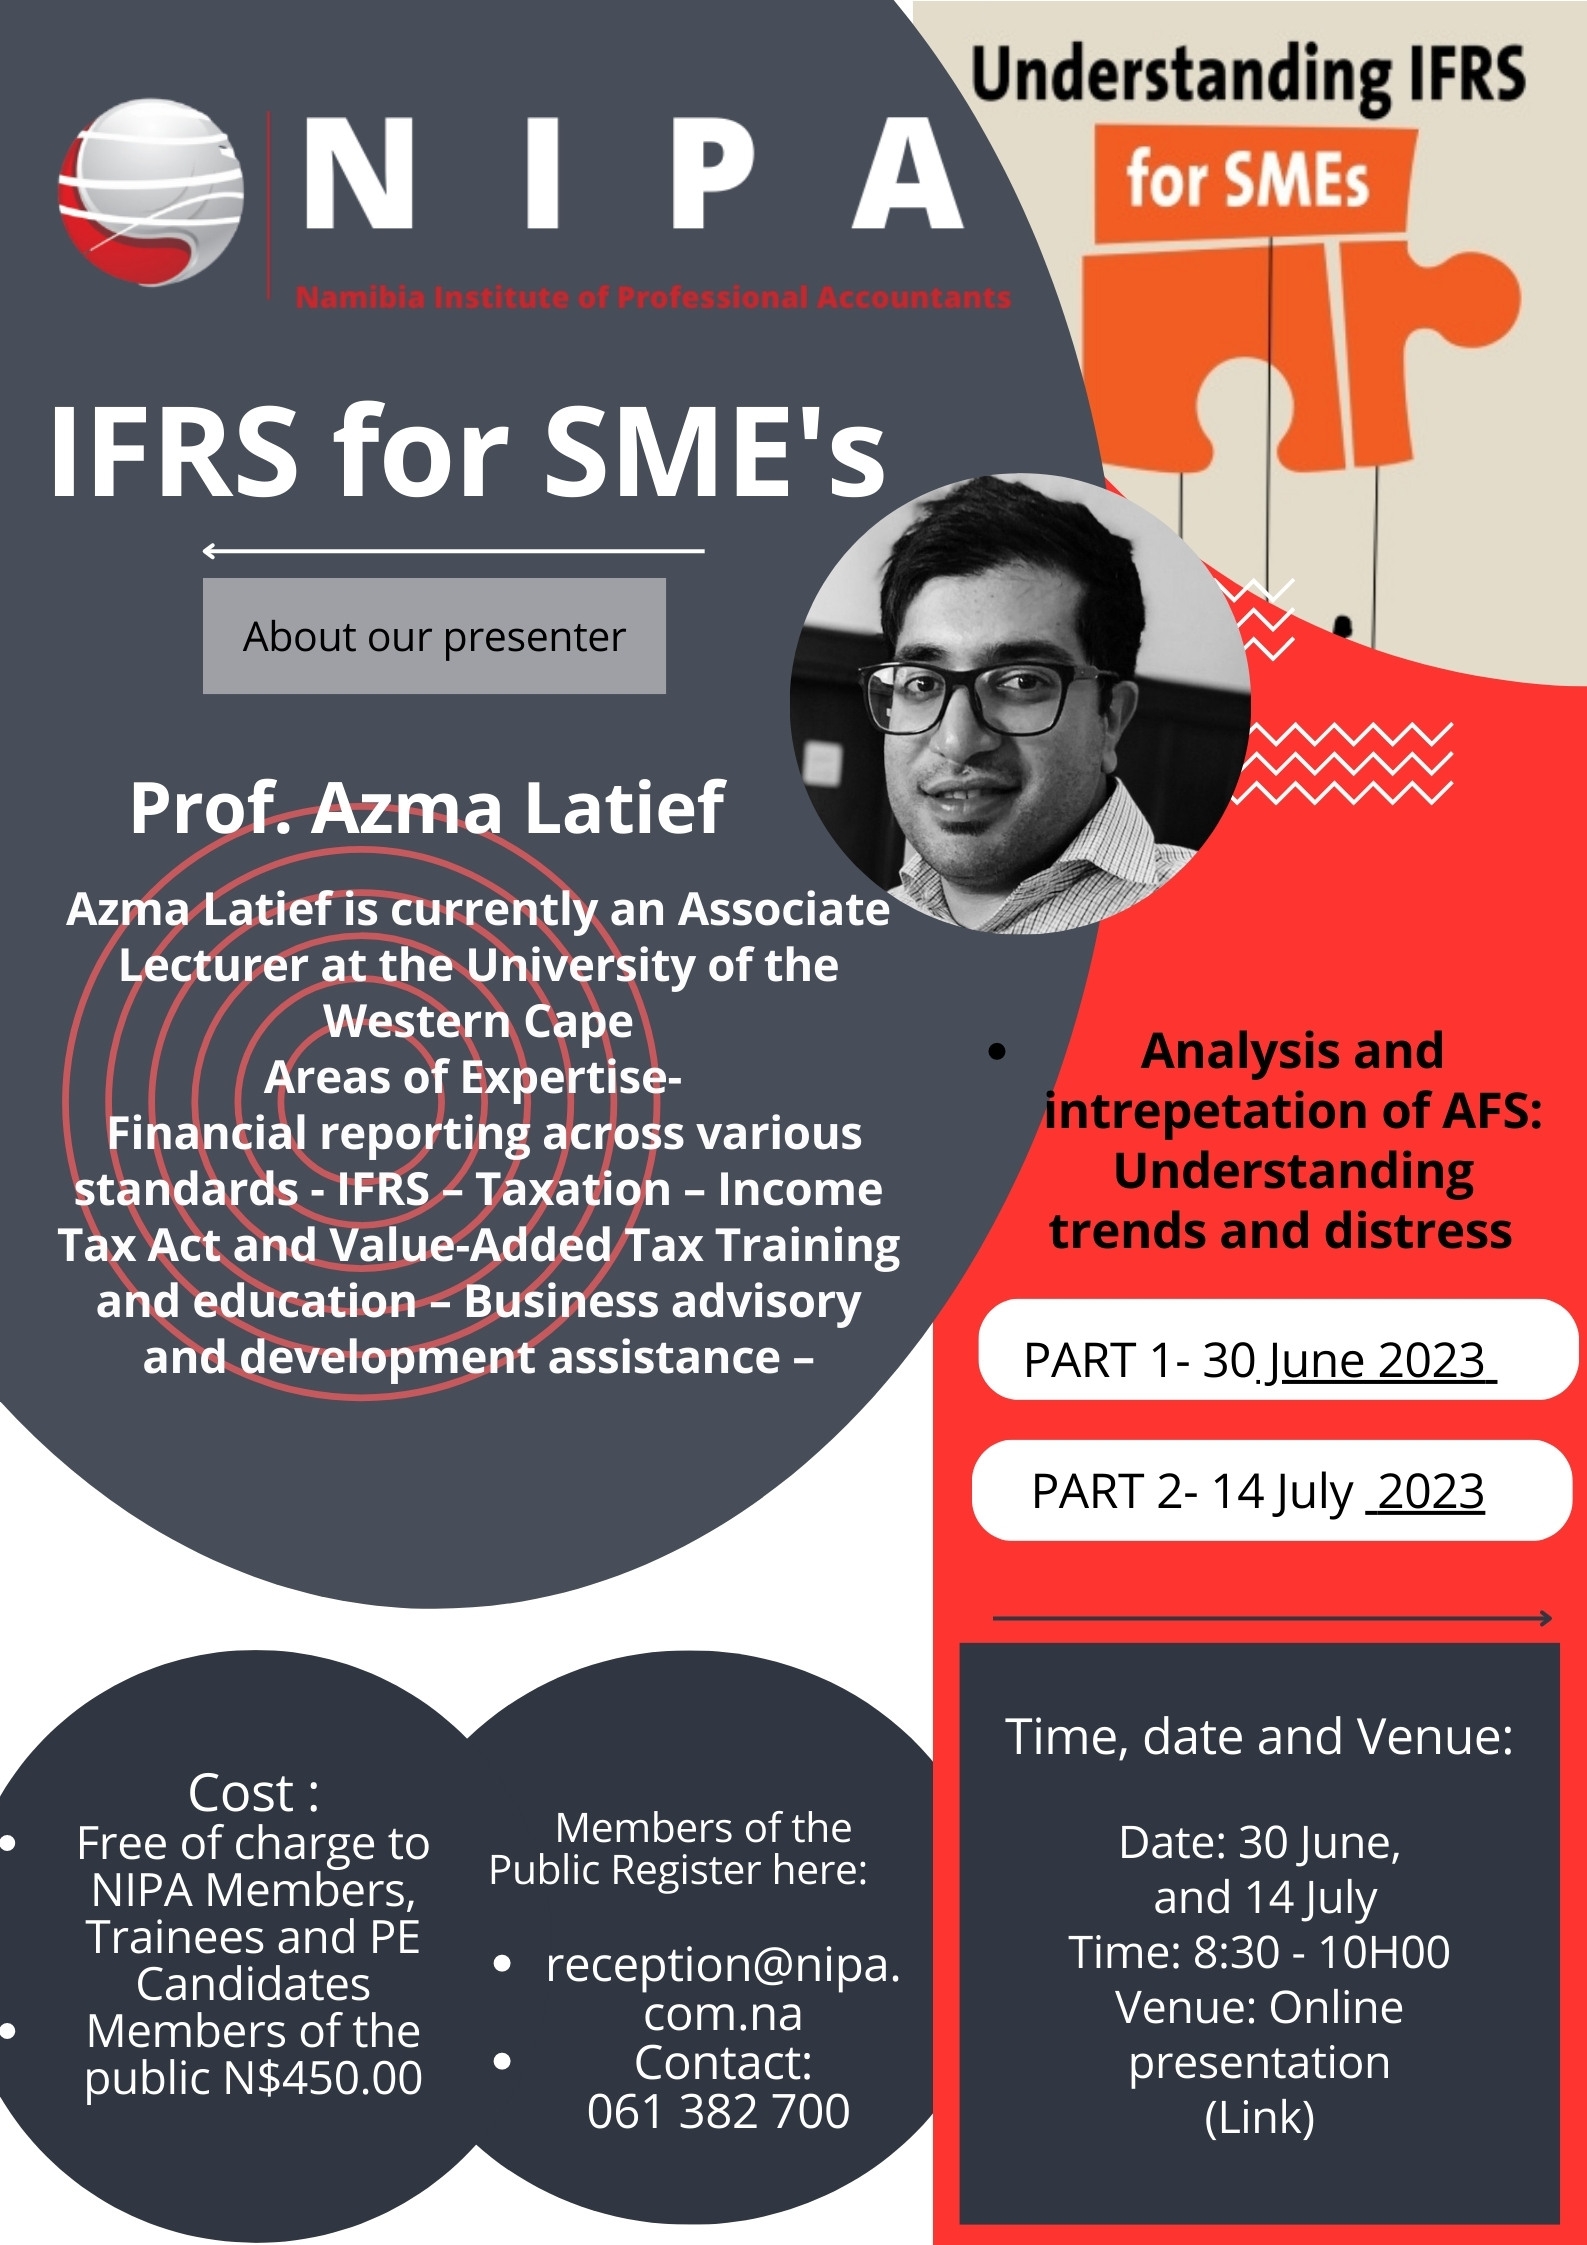 IFRS for SME’s